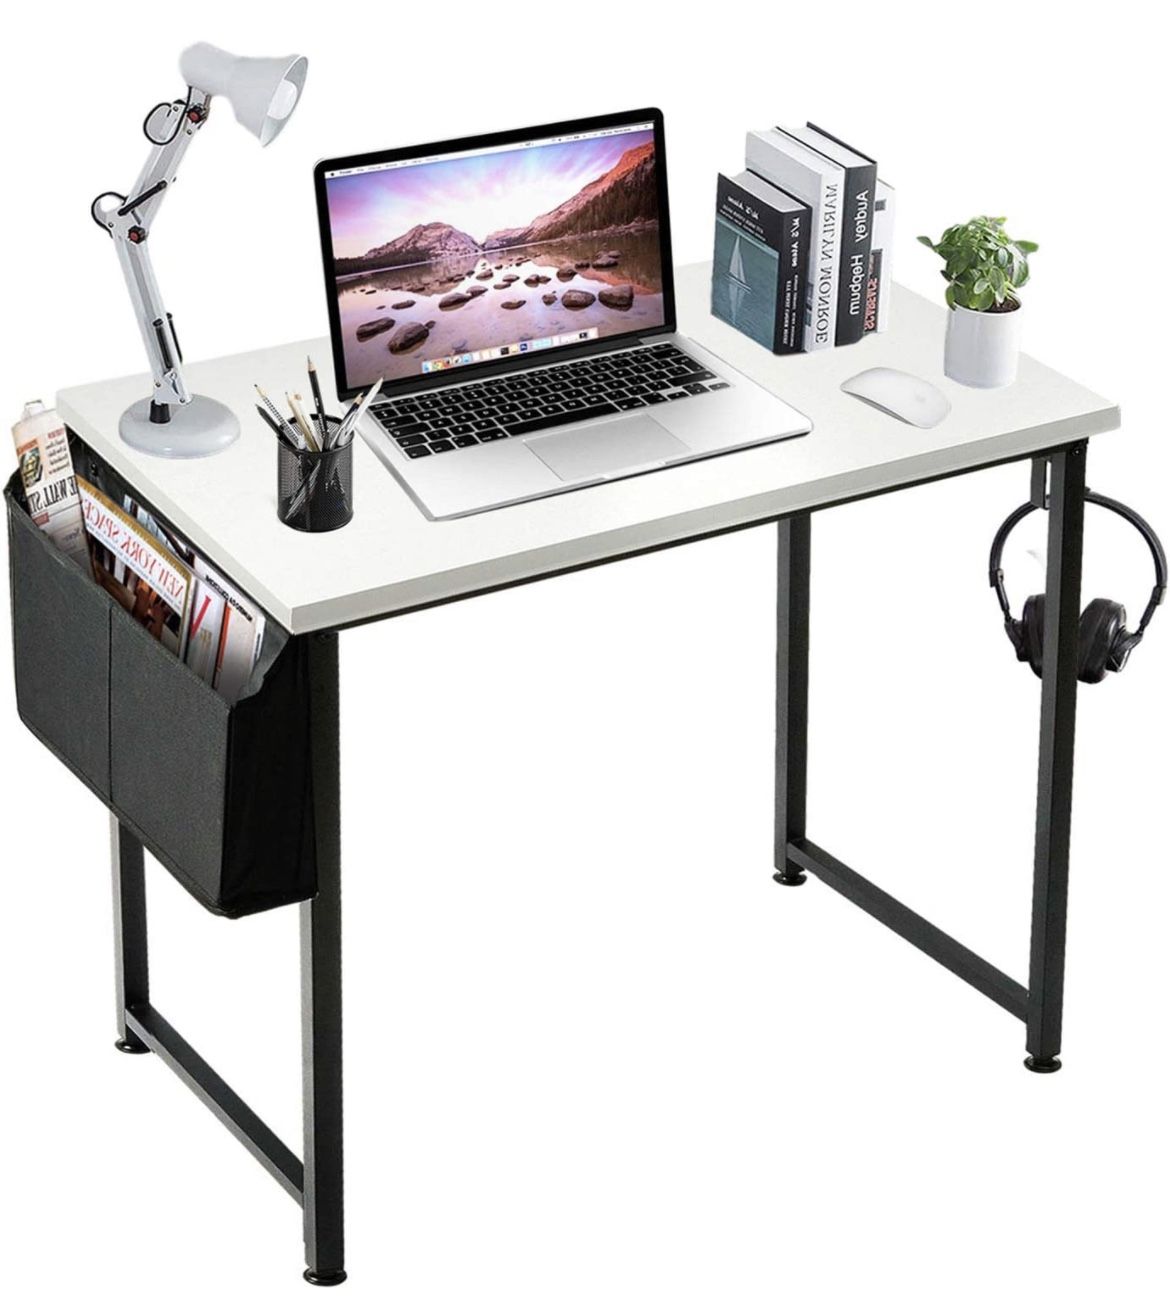 FREE Desk From Amazon